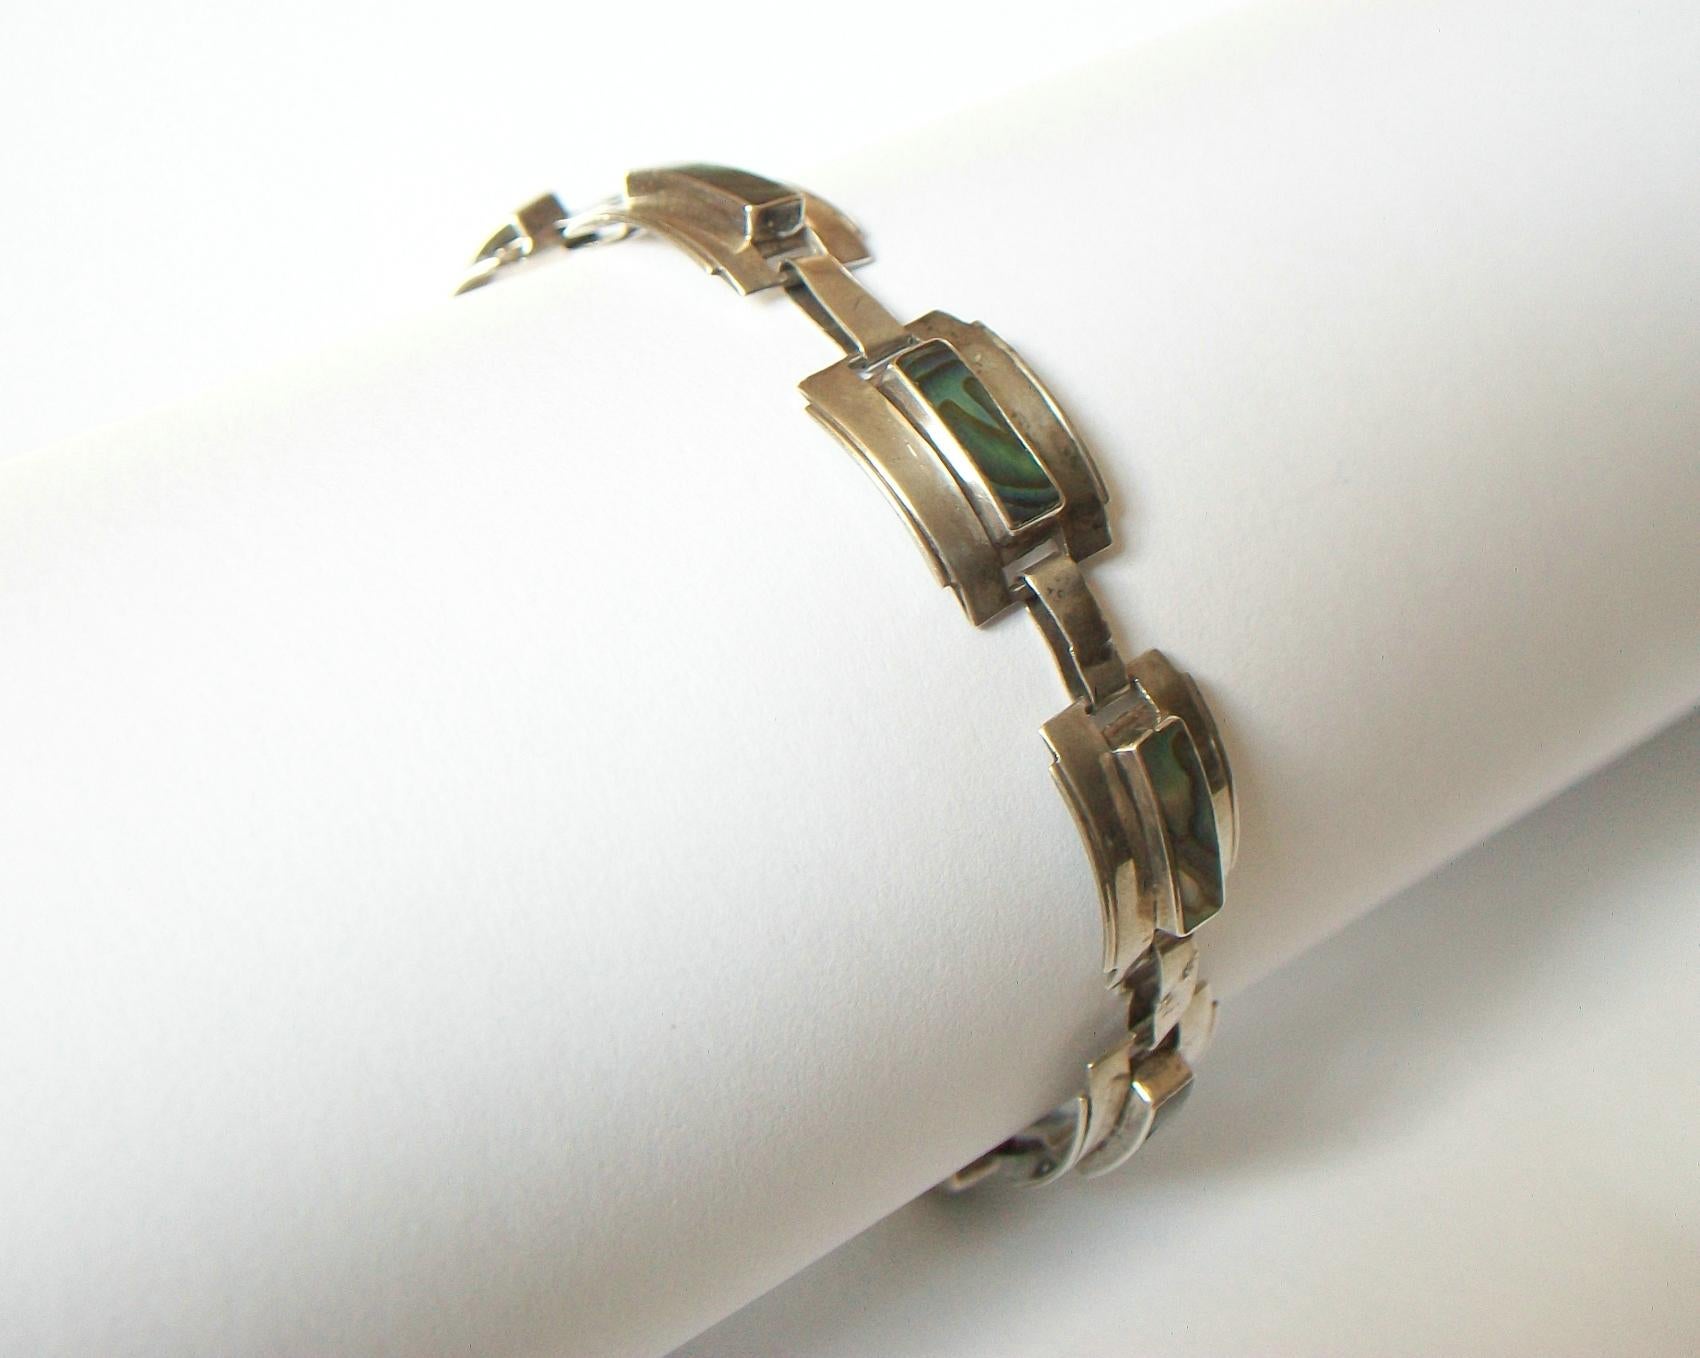 Modernist sterling silver and abalone chain link bracelet - hand made - delicate details with inset shell - fits a small wrist - box clasp closure - signed on the back and on the clasp - 925/1000 - Mexico (Taxco) - circa 1950's.

Excellent vintage